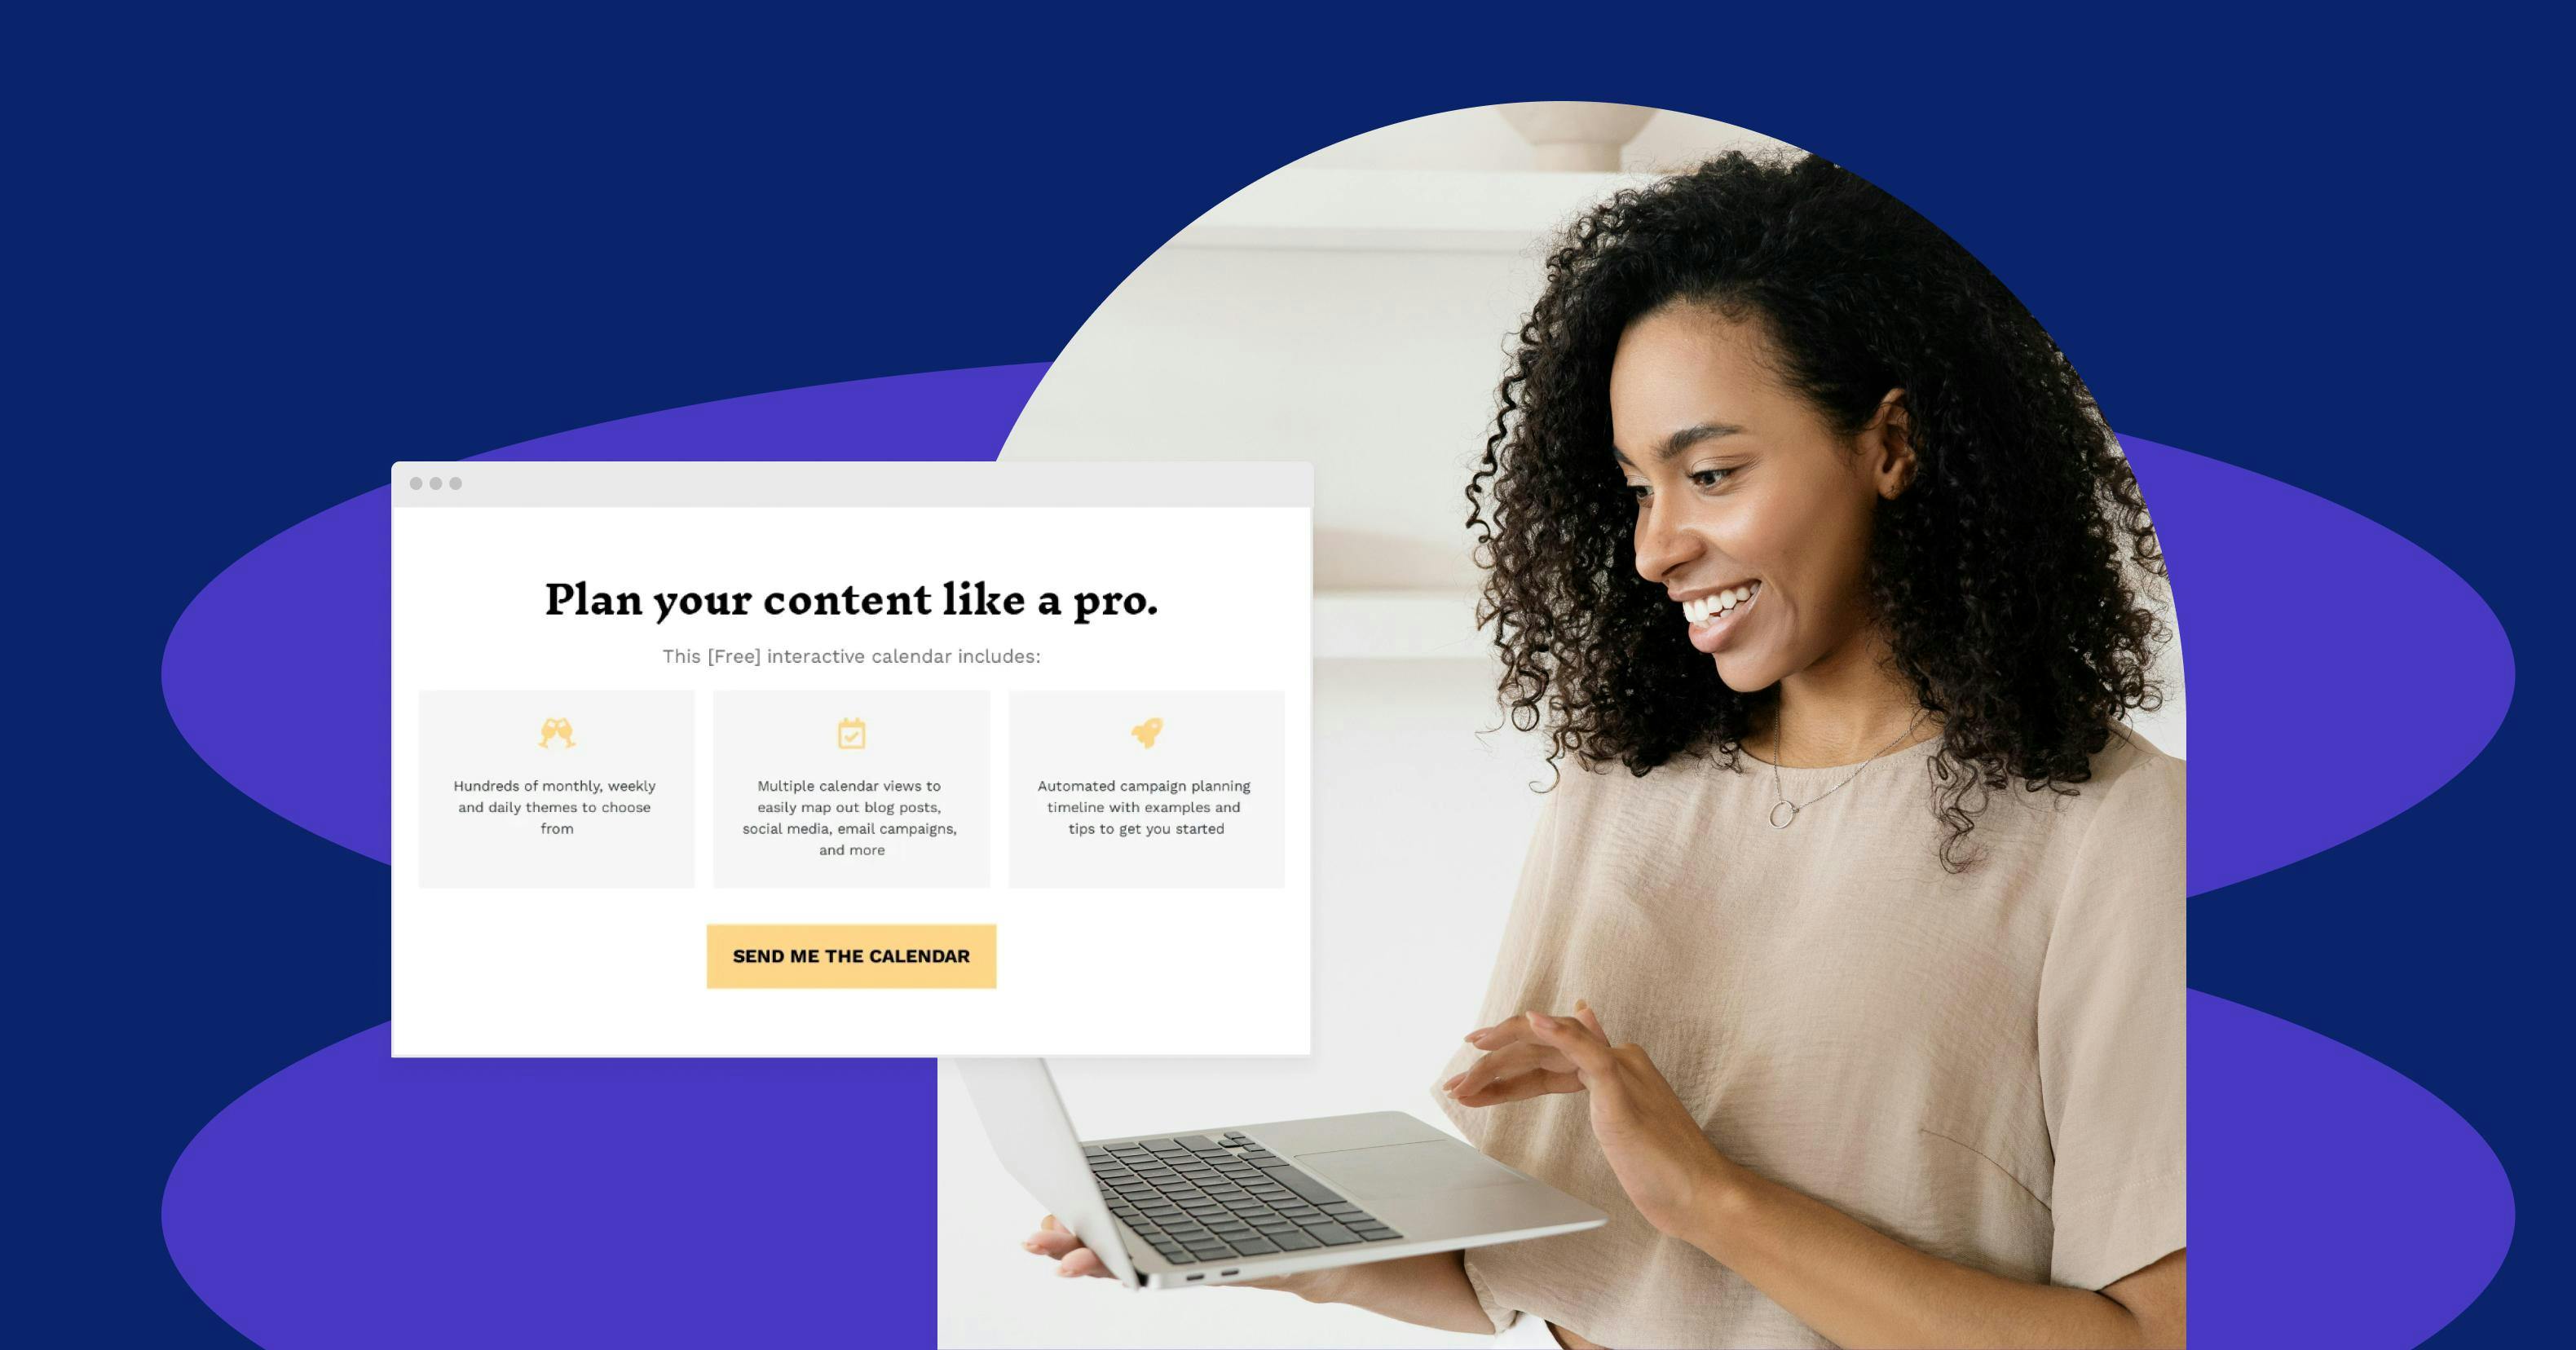 Landing page UX featuring a woman using a laptop with a content planning interface displayed on the screen. The text on the interface reads 'Plan your content like a pro' with options for themes, calendar views, and automated campaign planning. A button labeled 'Send me the calendar' is also visible.